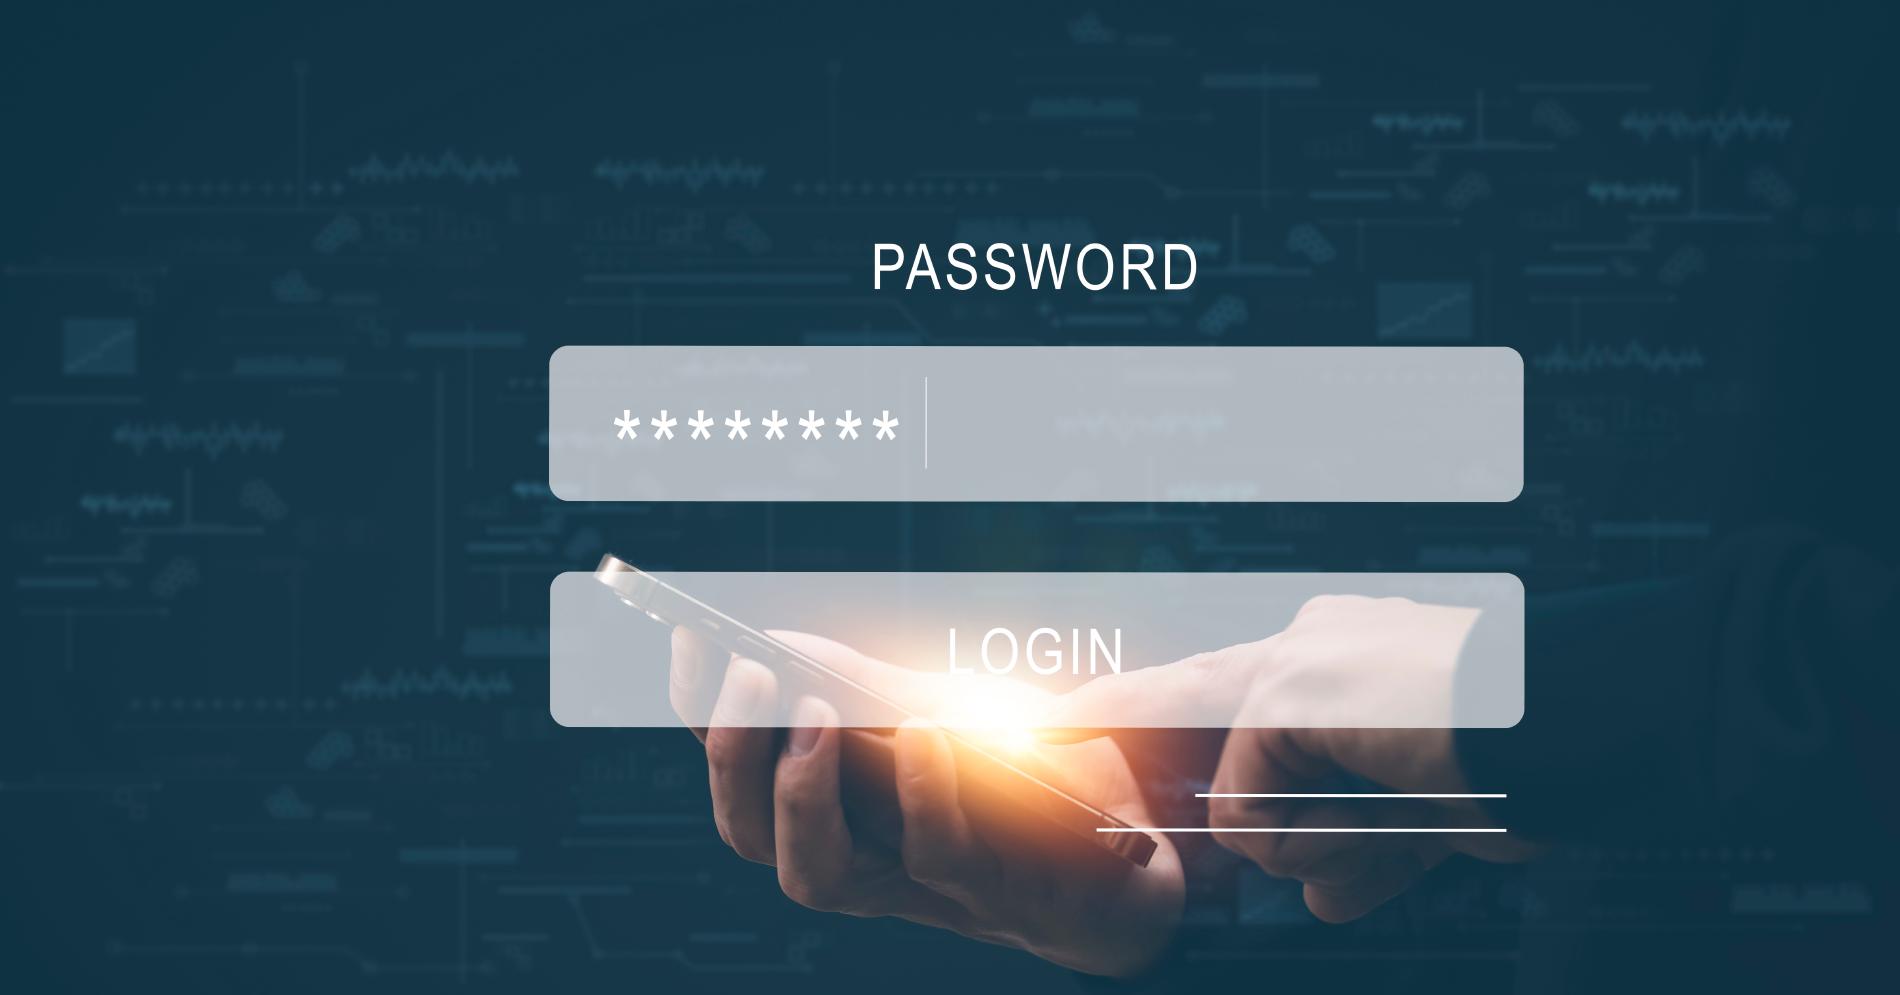 A login screen with password field is laid over a user hand holding smartphone in one hand and typing with his other hand.